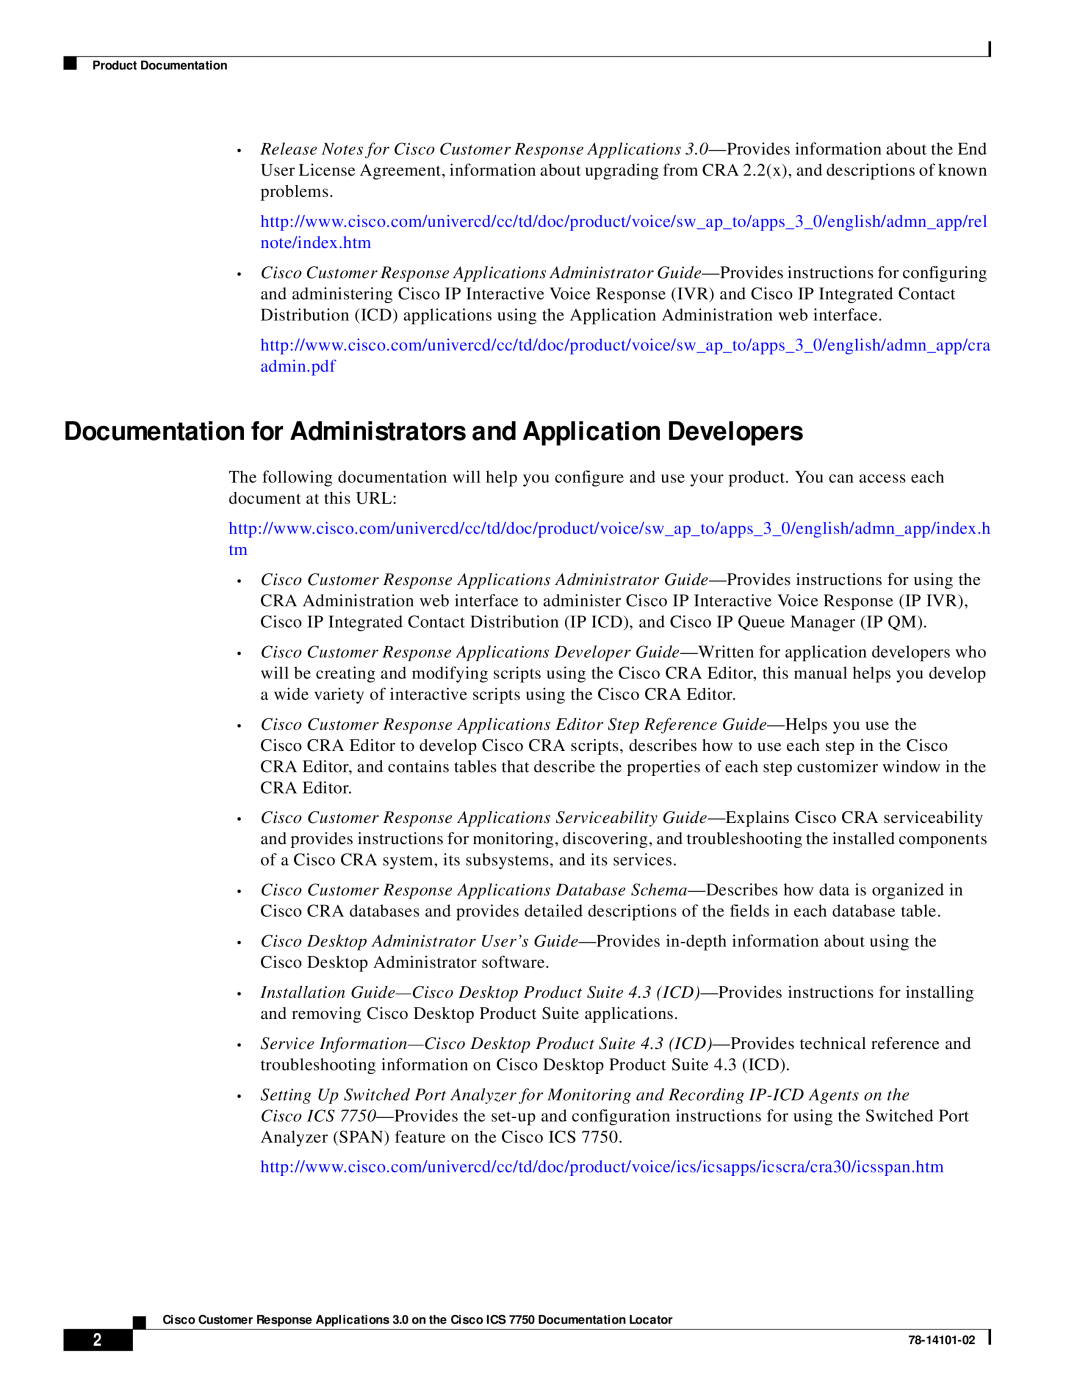 Cisco Systems ICS 7750 Documentation for Administrators and Application Developers, Product Documentation, 78-14101-02 